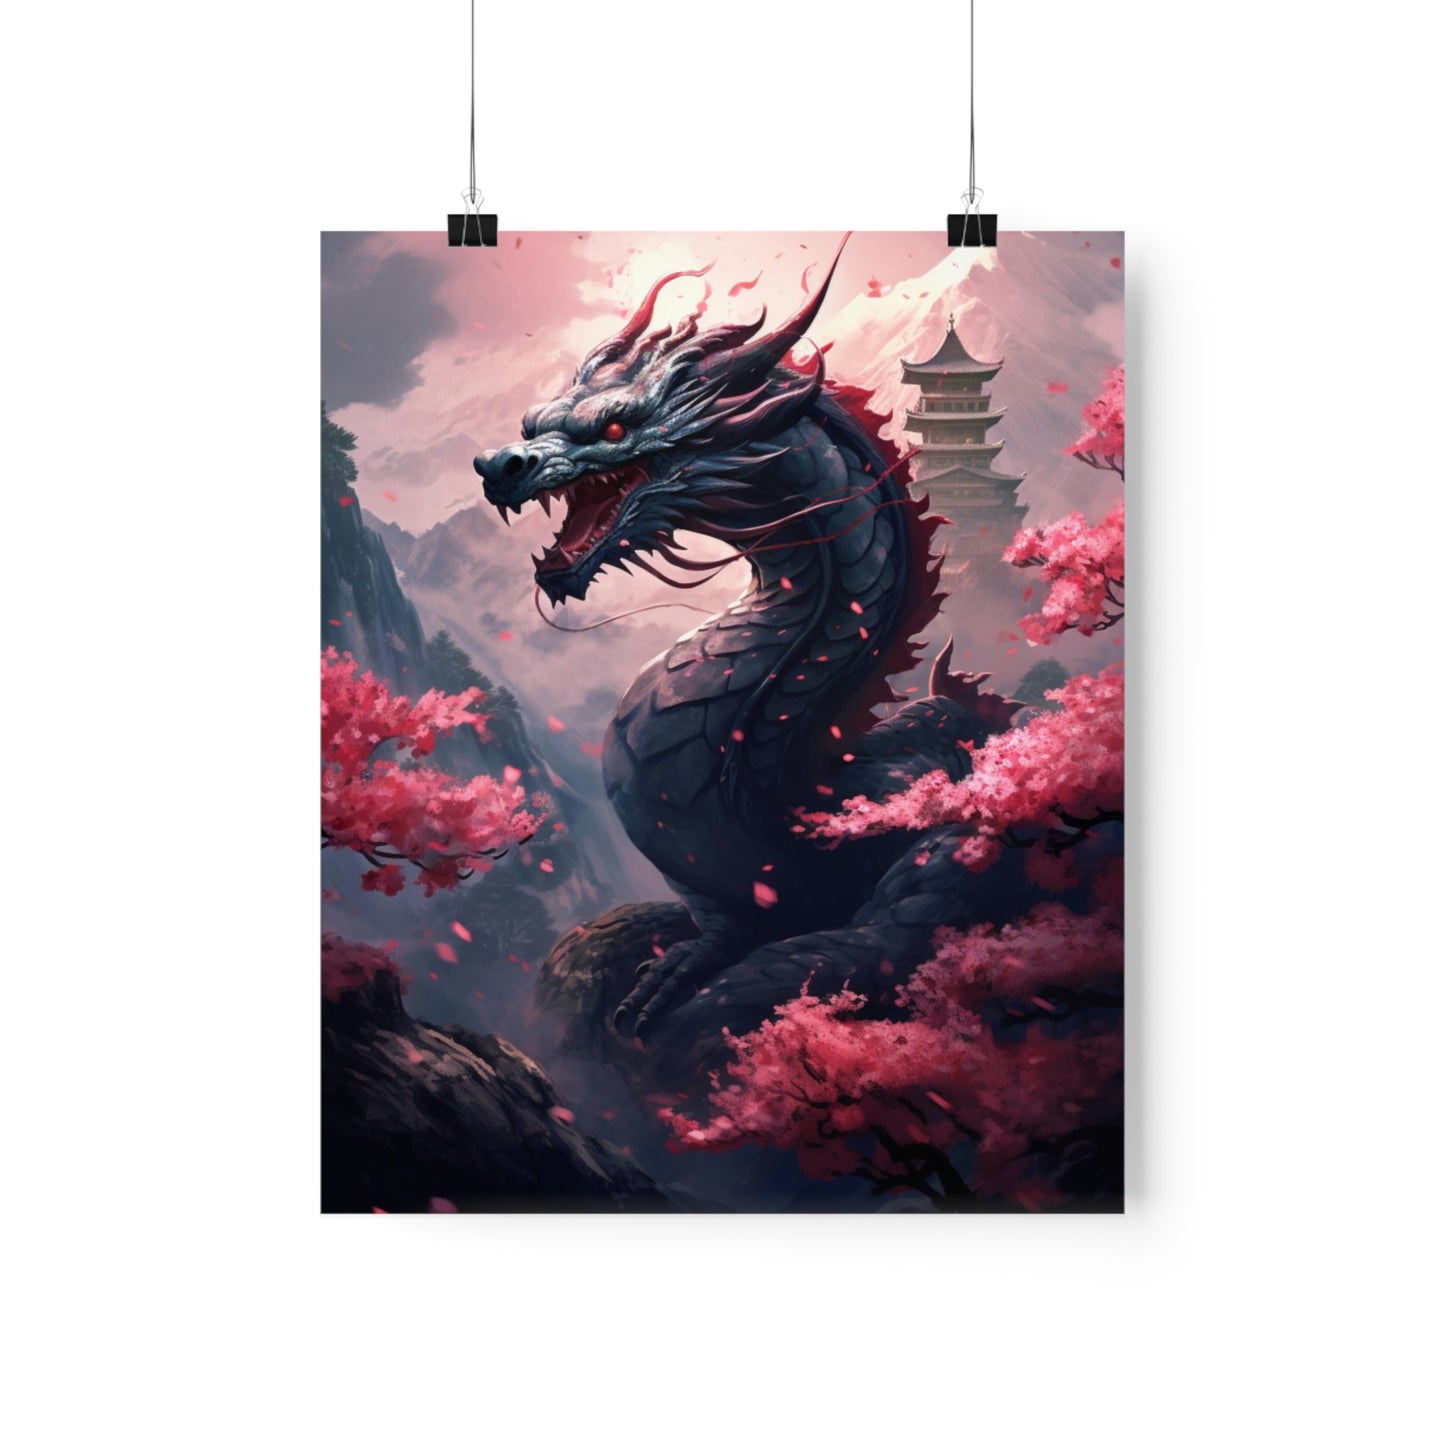 Japanese Dragon Poster Print, Cherry Blossom Picture Photo Wall Image Art Vertical Paper Artwork Small Large Cool Room Office Decor